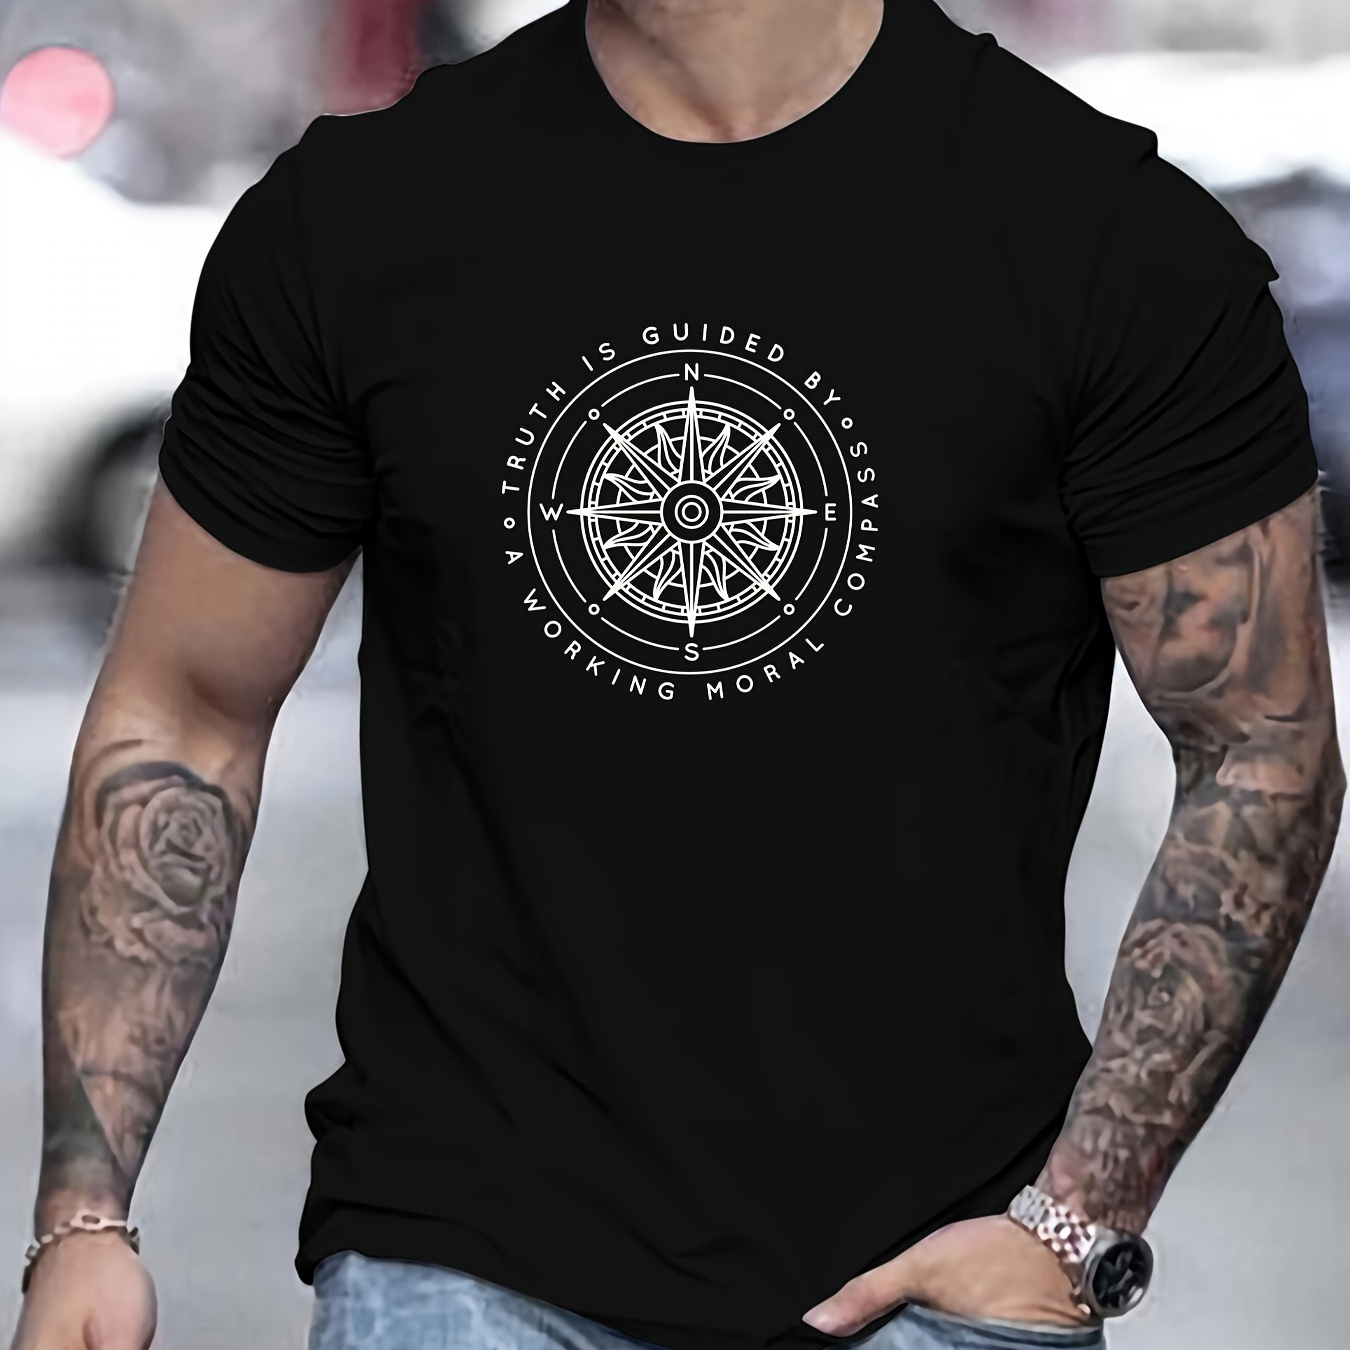 

Compass And Slogan Print T Shirt, Tees For Men, Casual Short Sleeve T-shirt For Summer